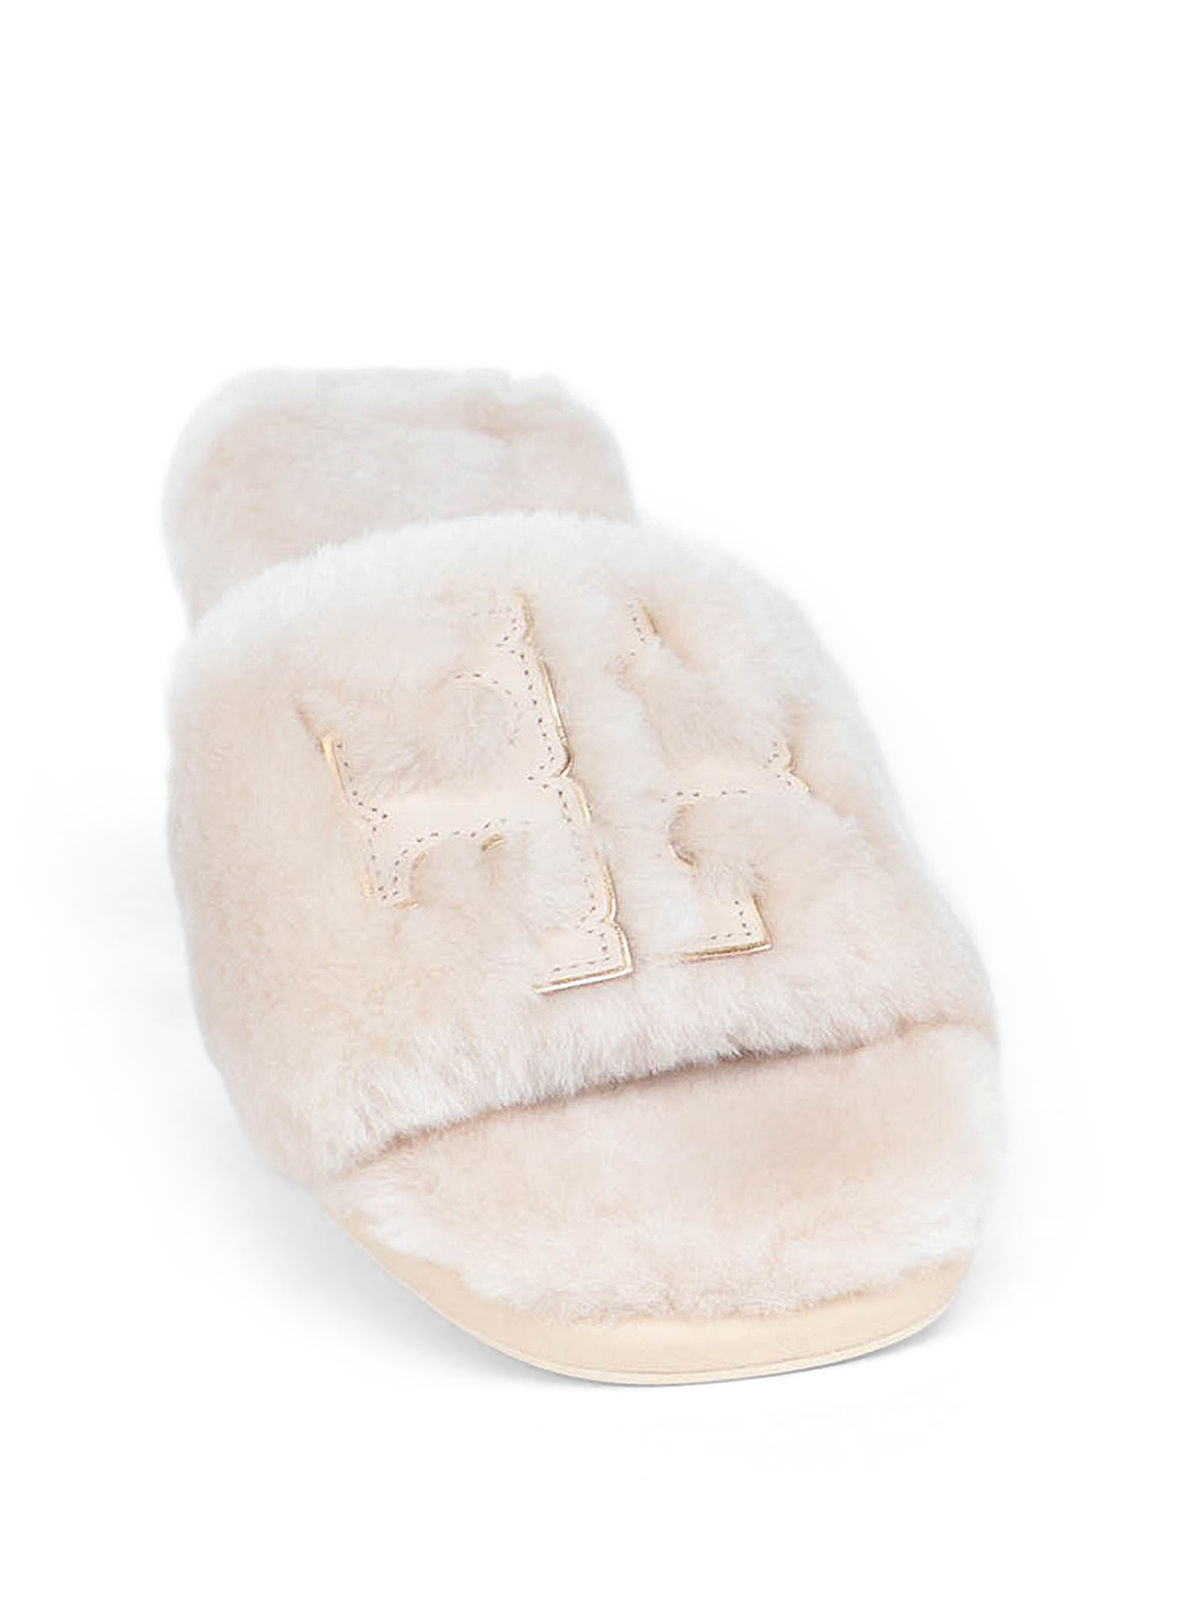 Sandals Tory Burch - Double T shearling slides - 83484100 